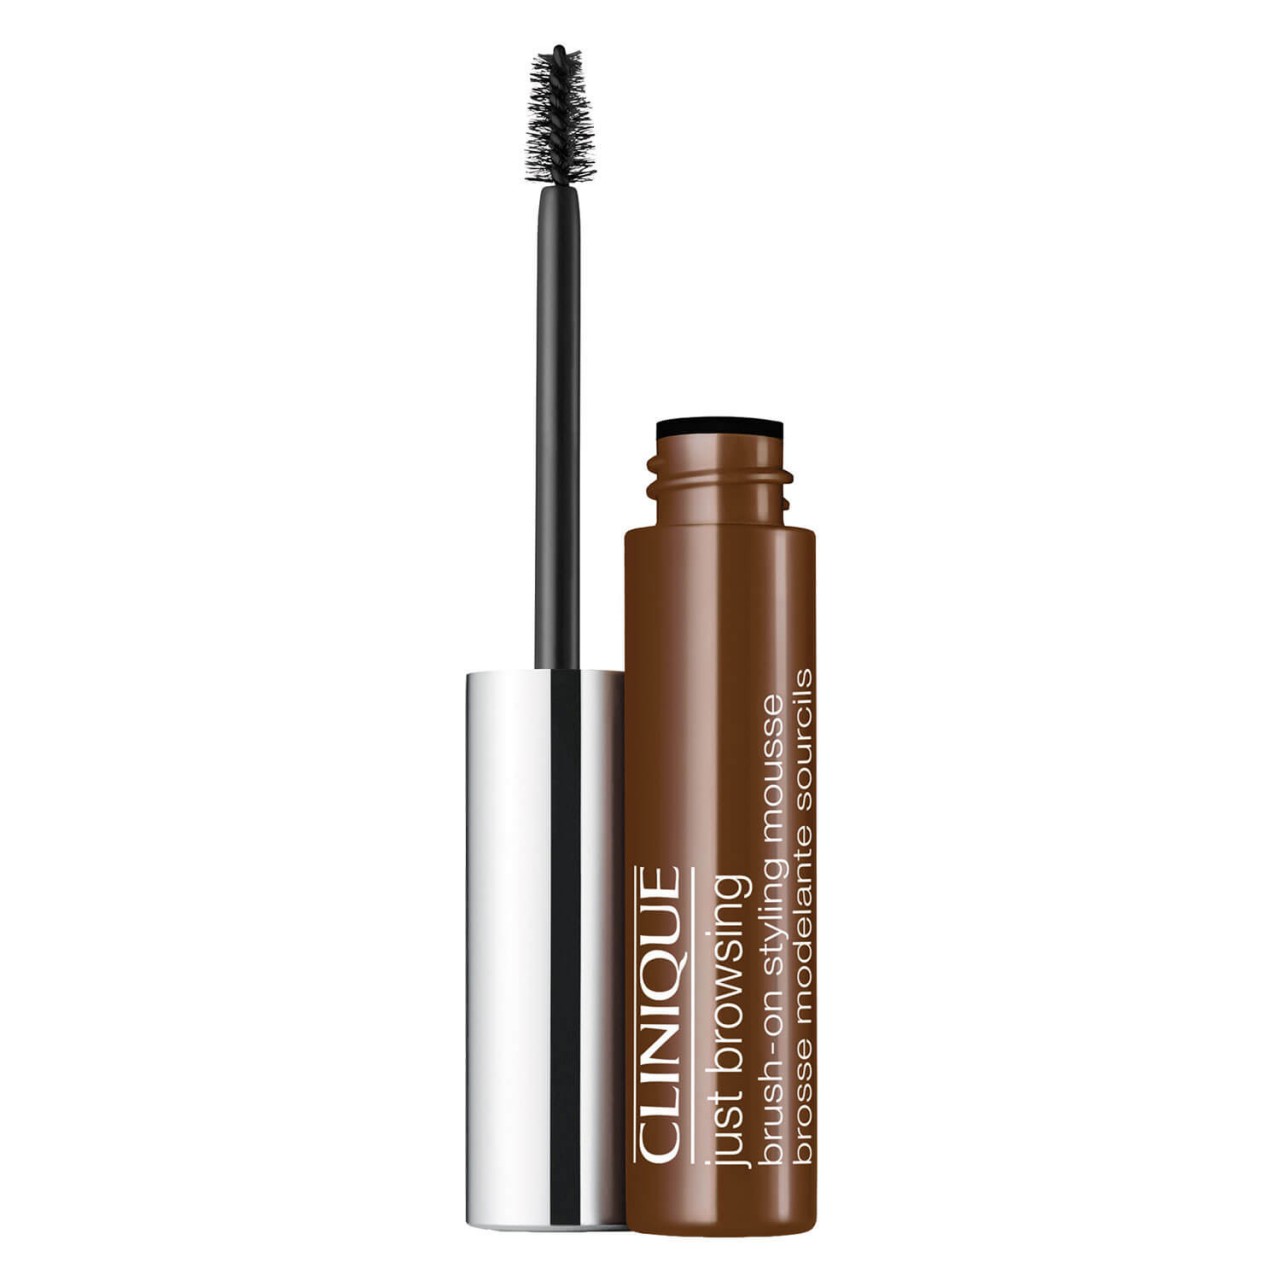 Clinique - Just Browsing Brush-On Styling Mousse - Deep Brown